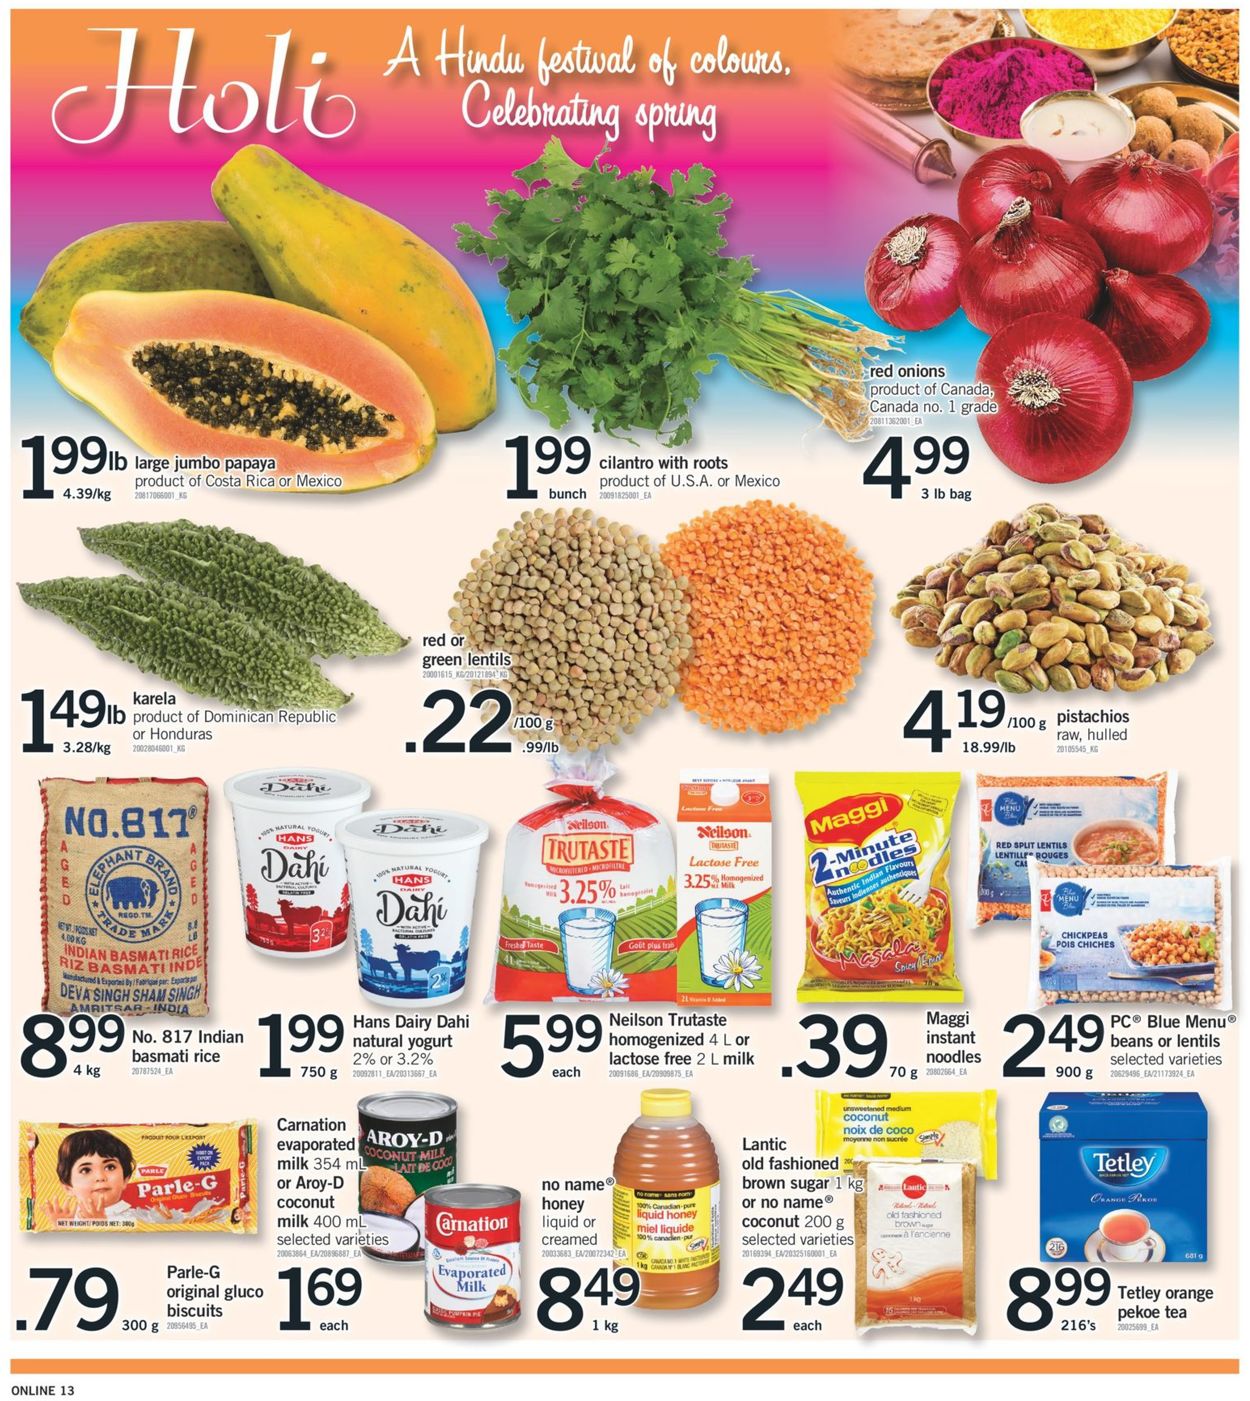 Fortinos Flyer from 02/24/2022